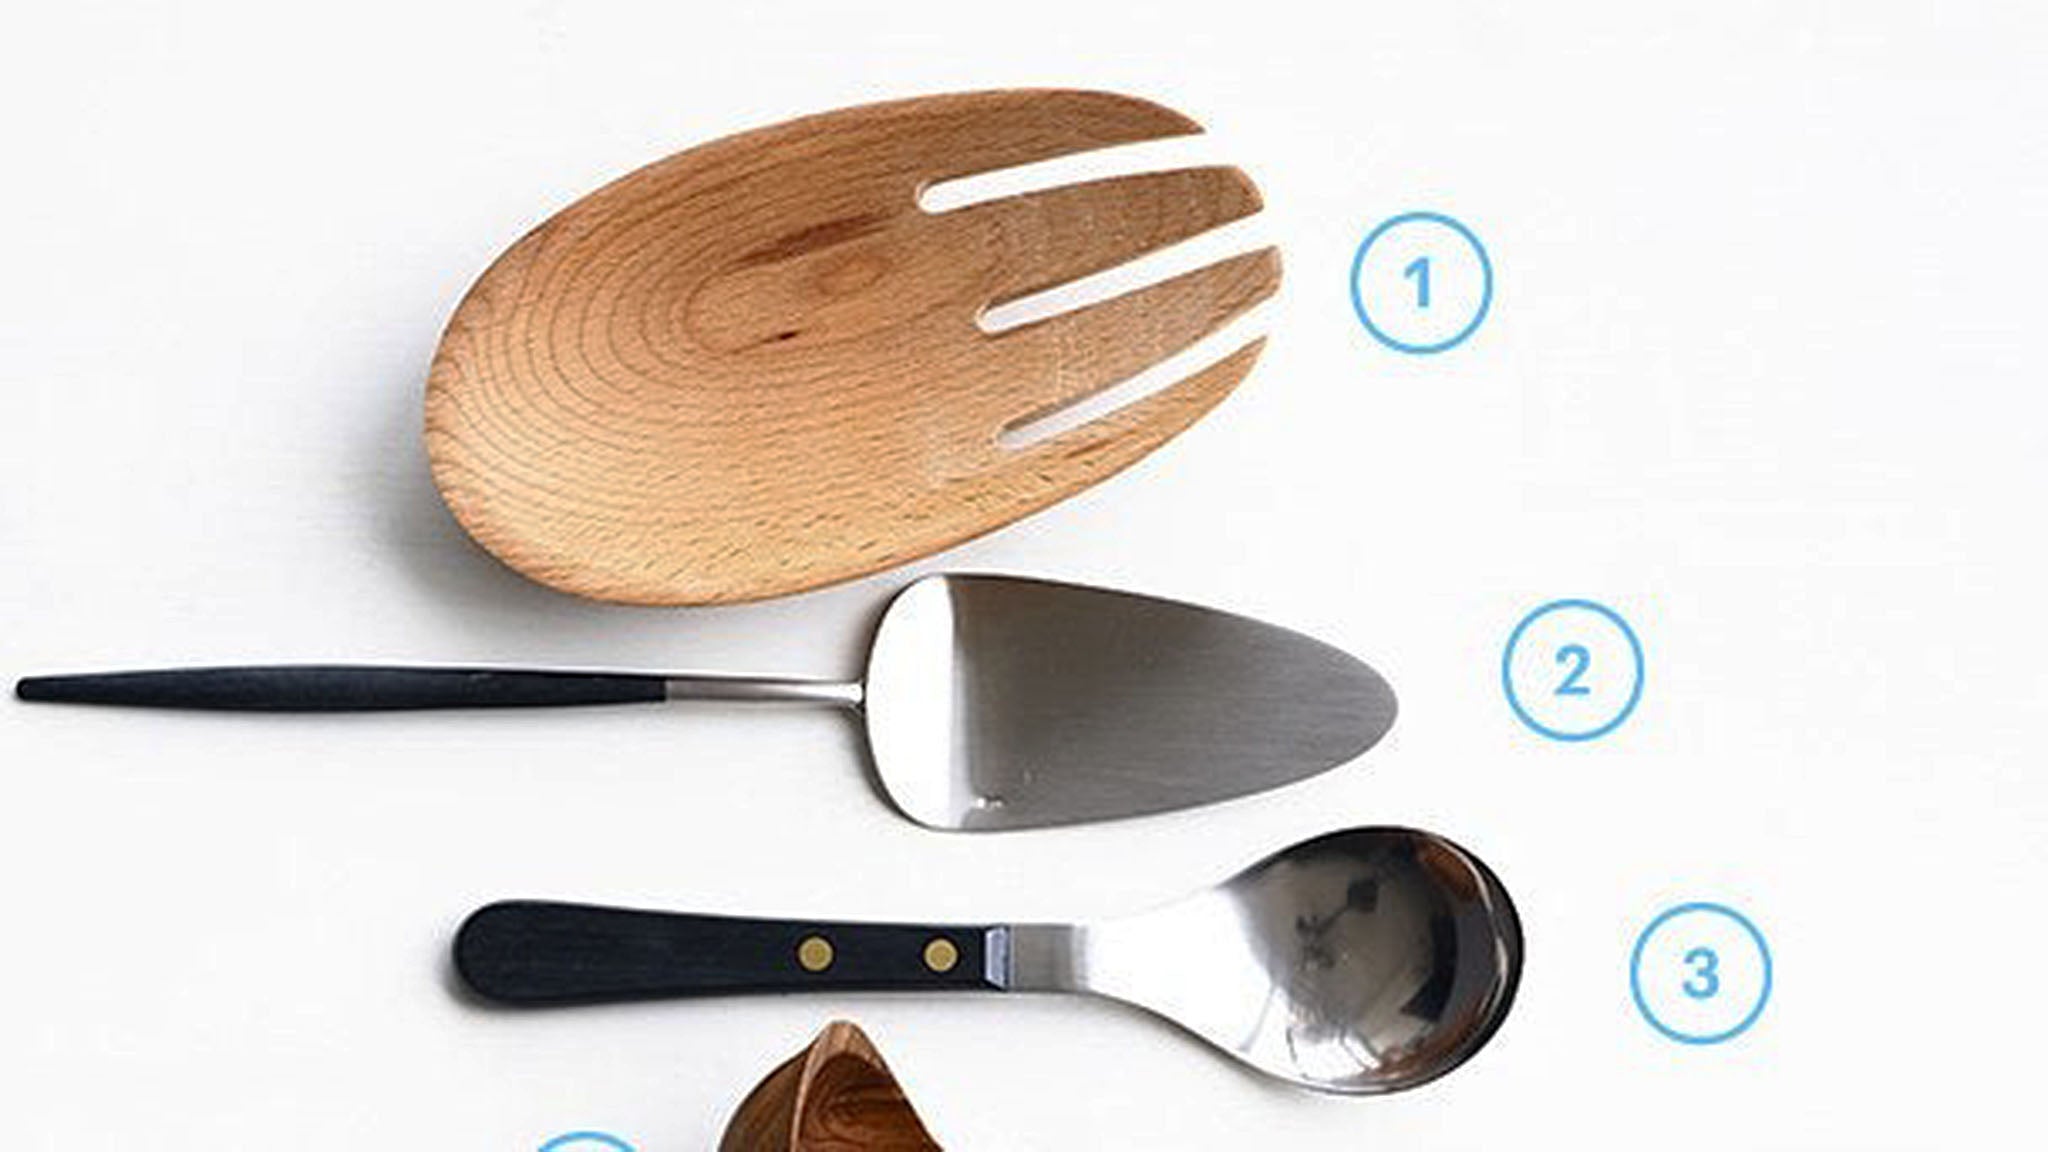 Bon Appetit November 2013: 10 Serving Utensils to Buy for Thanksgiving. All the tools you need to get those seconds (and thirds) onto your plate.